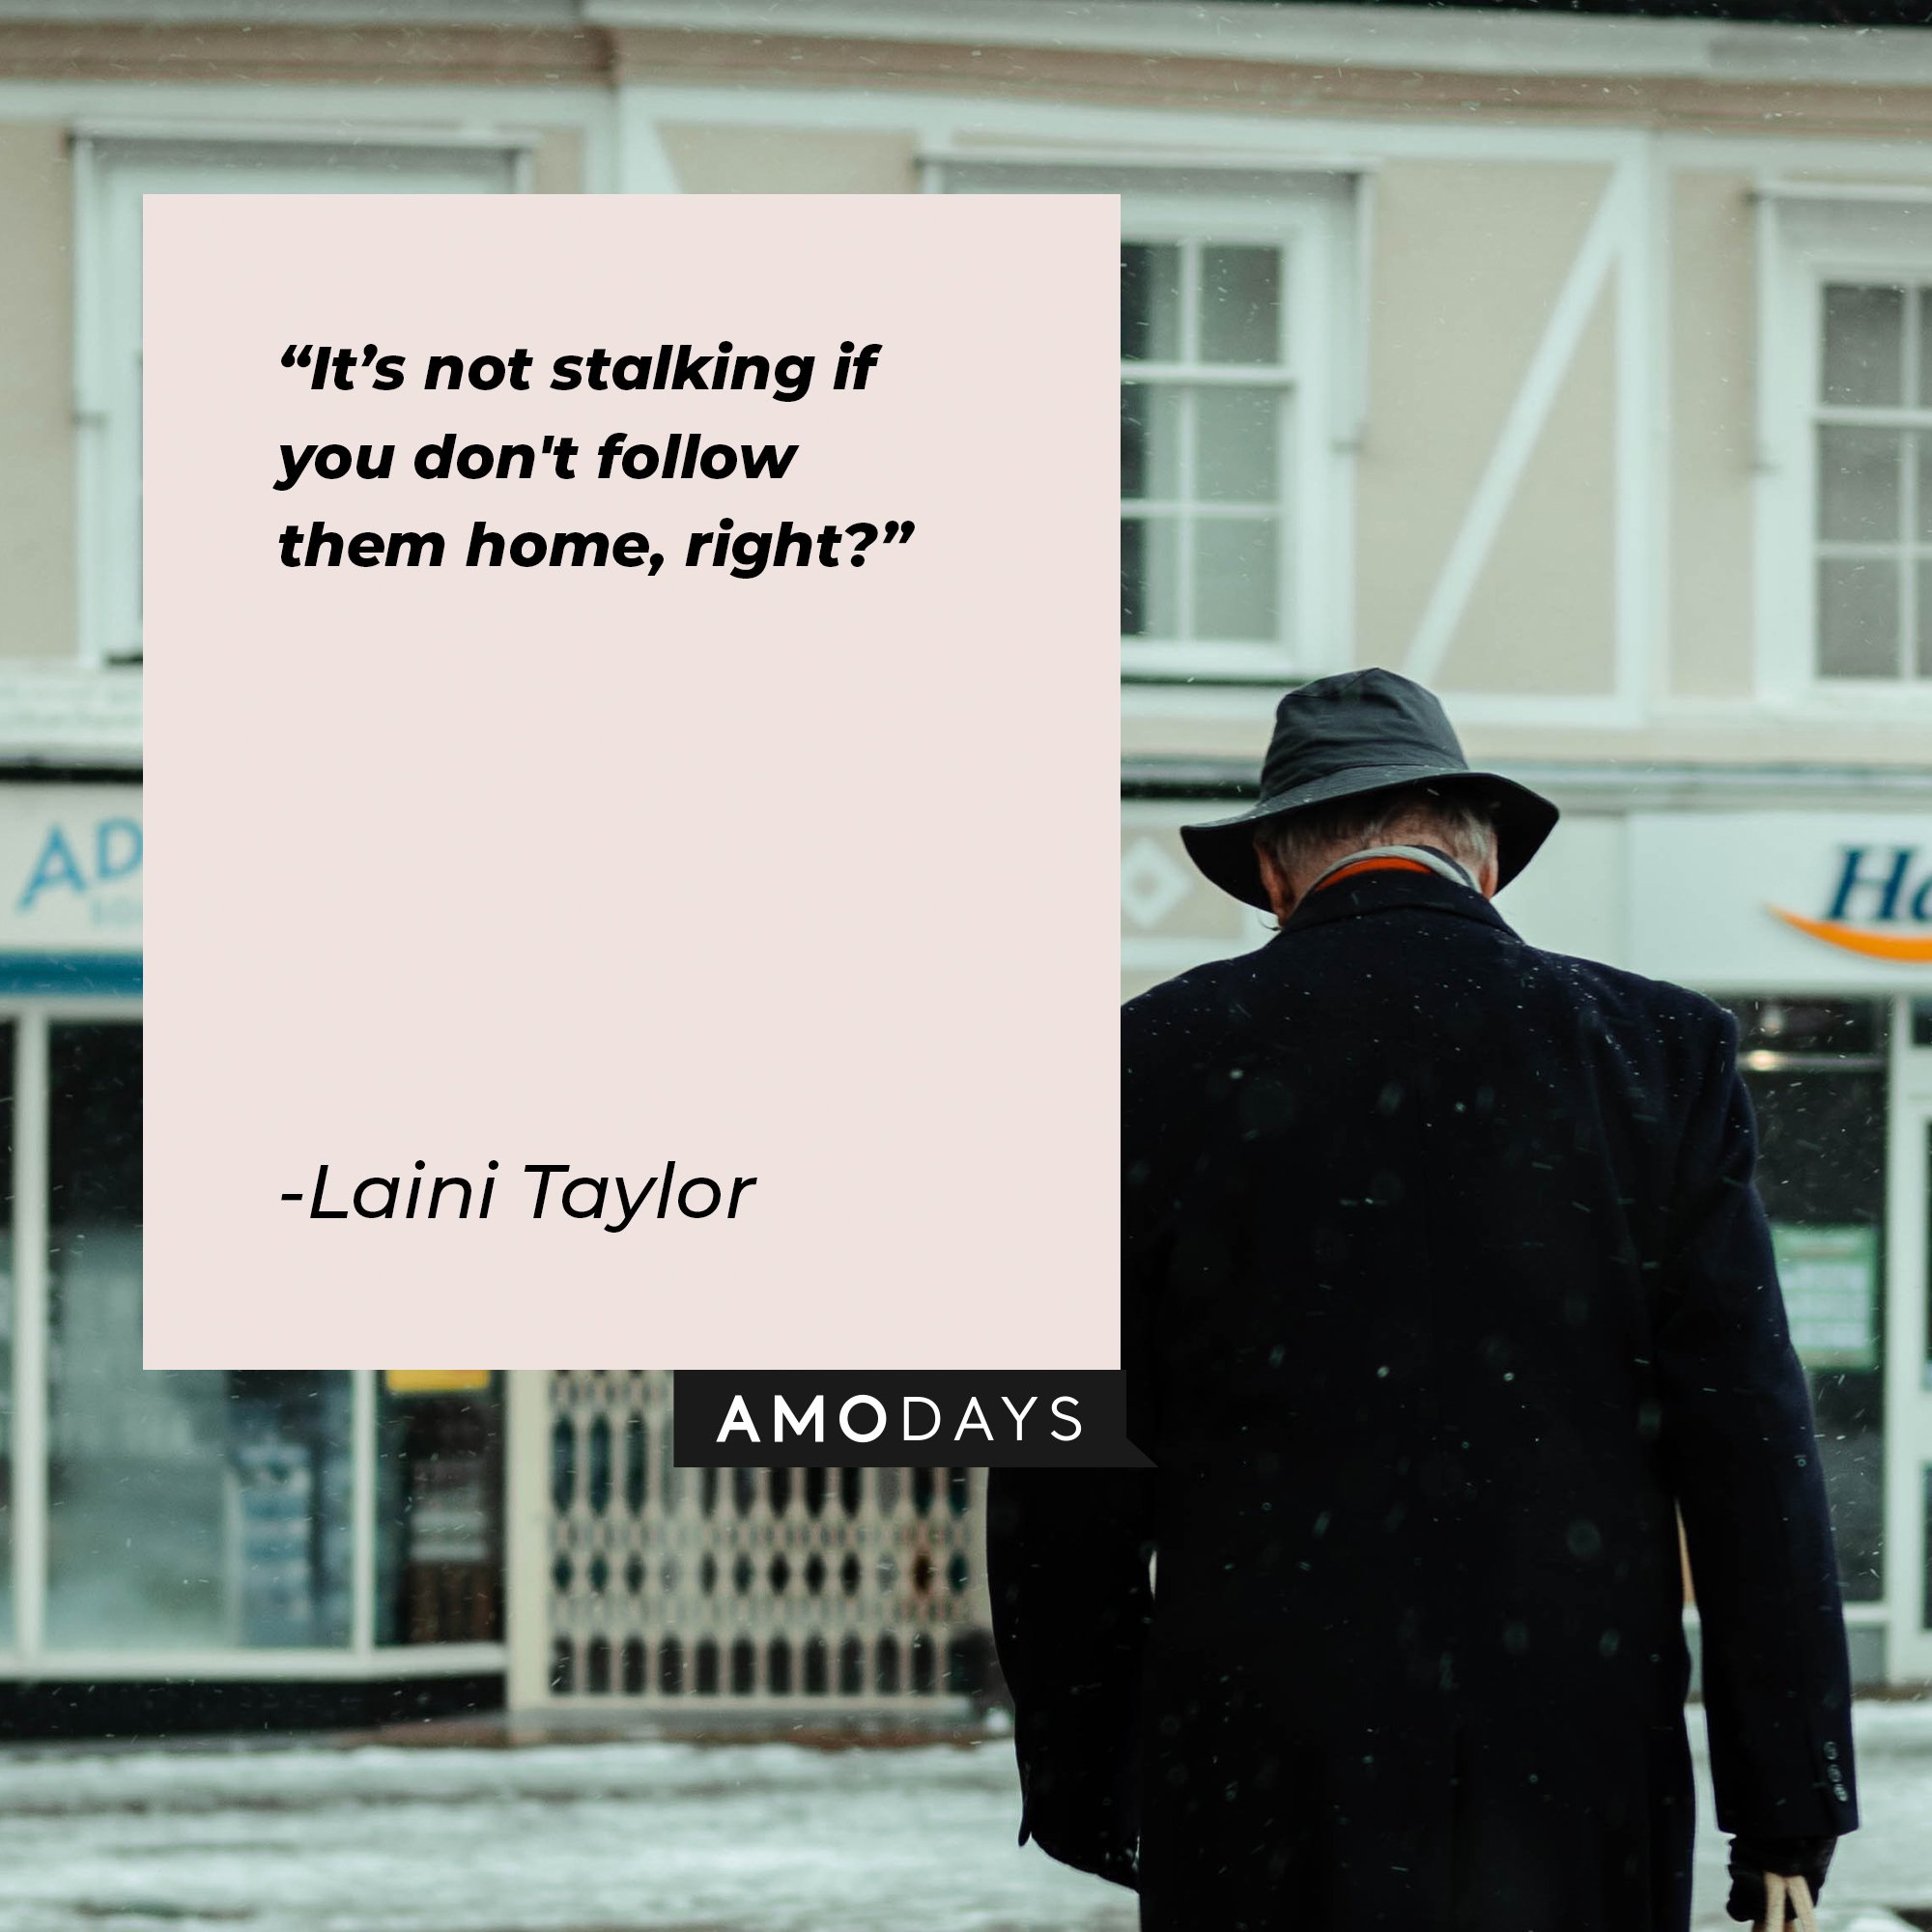 Laini Taylor’s quote: “It’s not stalking if you don't follow them home, right?” | Image: AmoDays